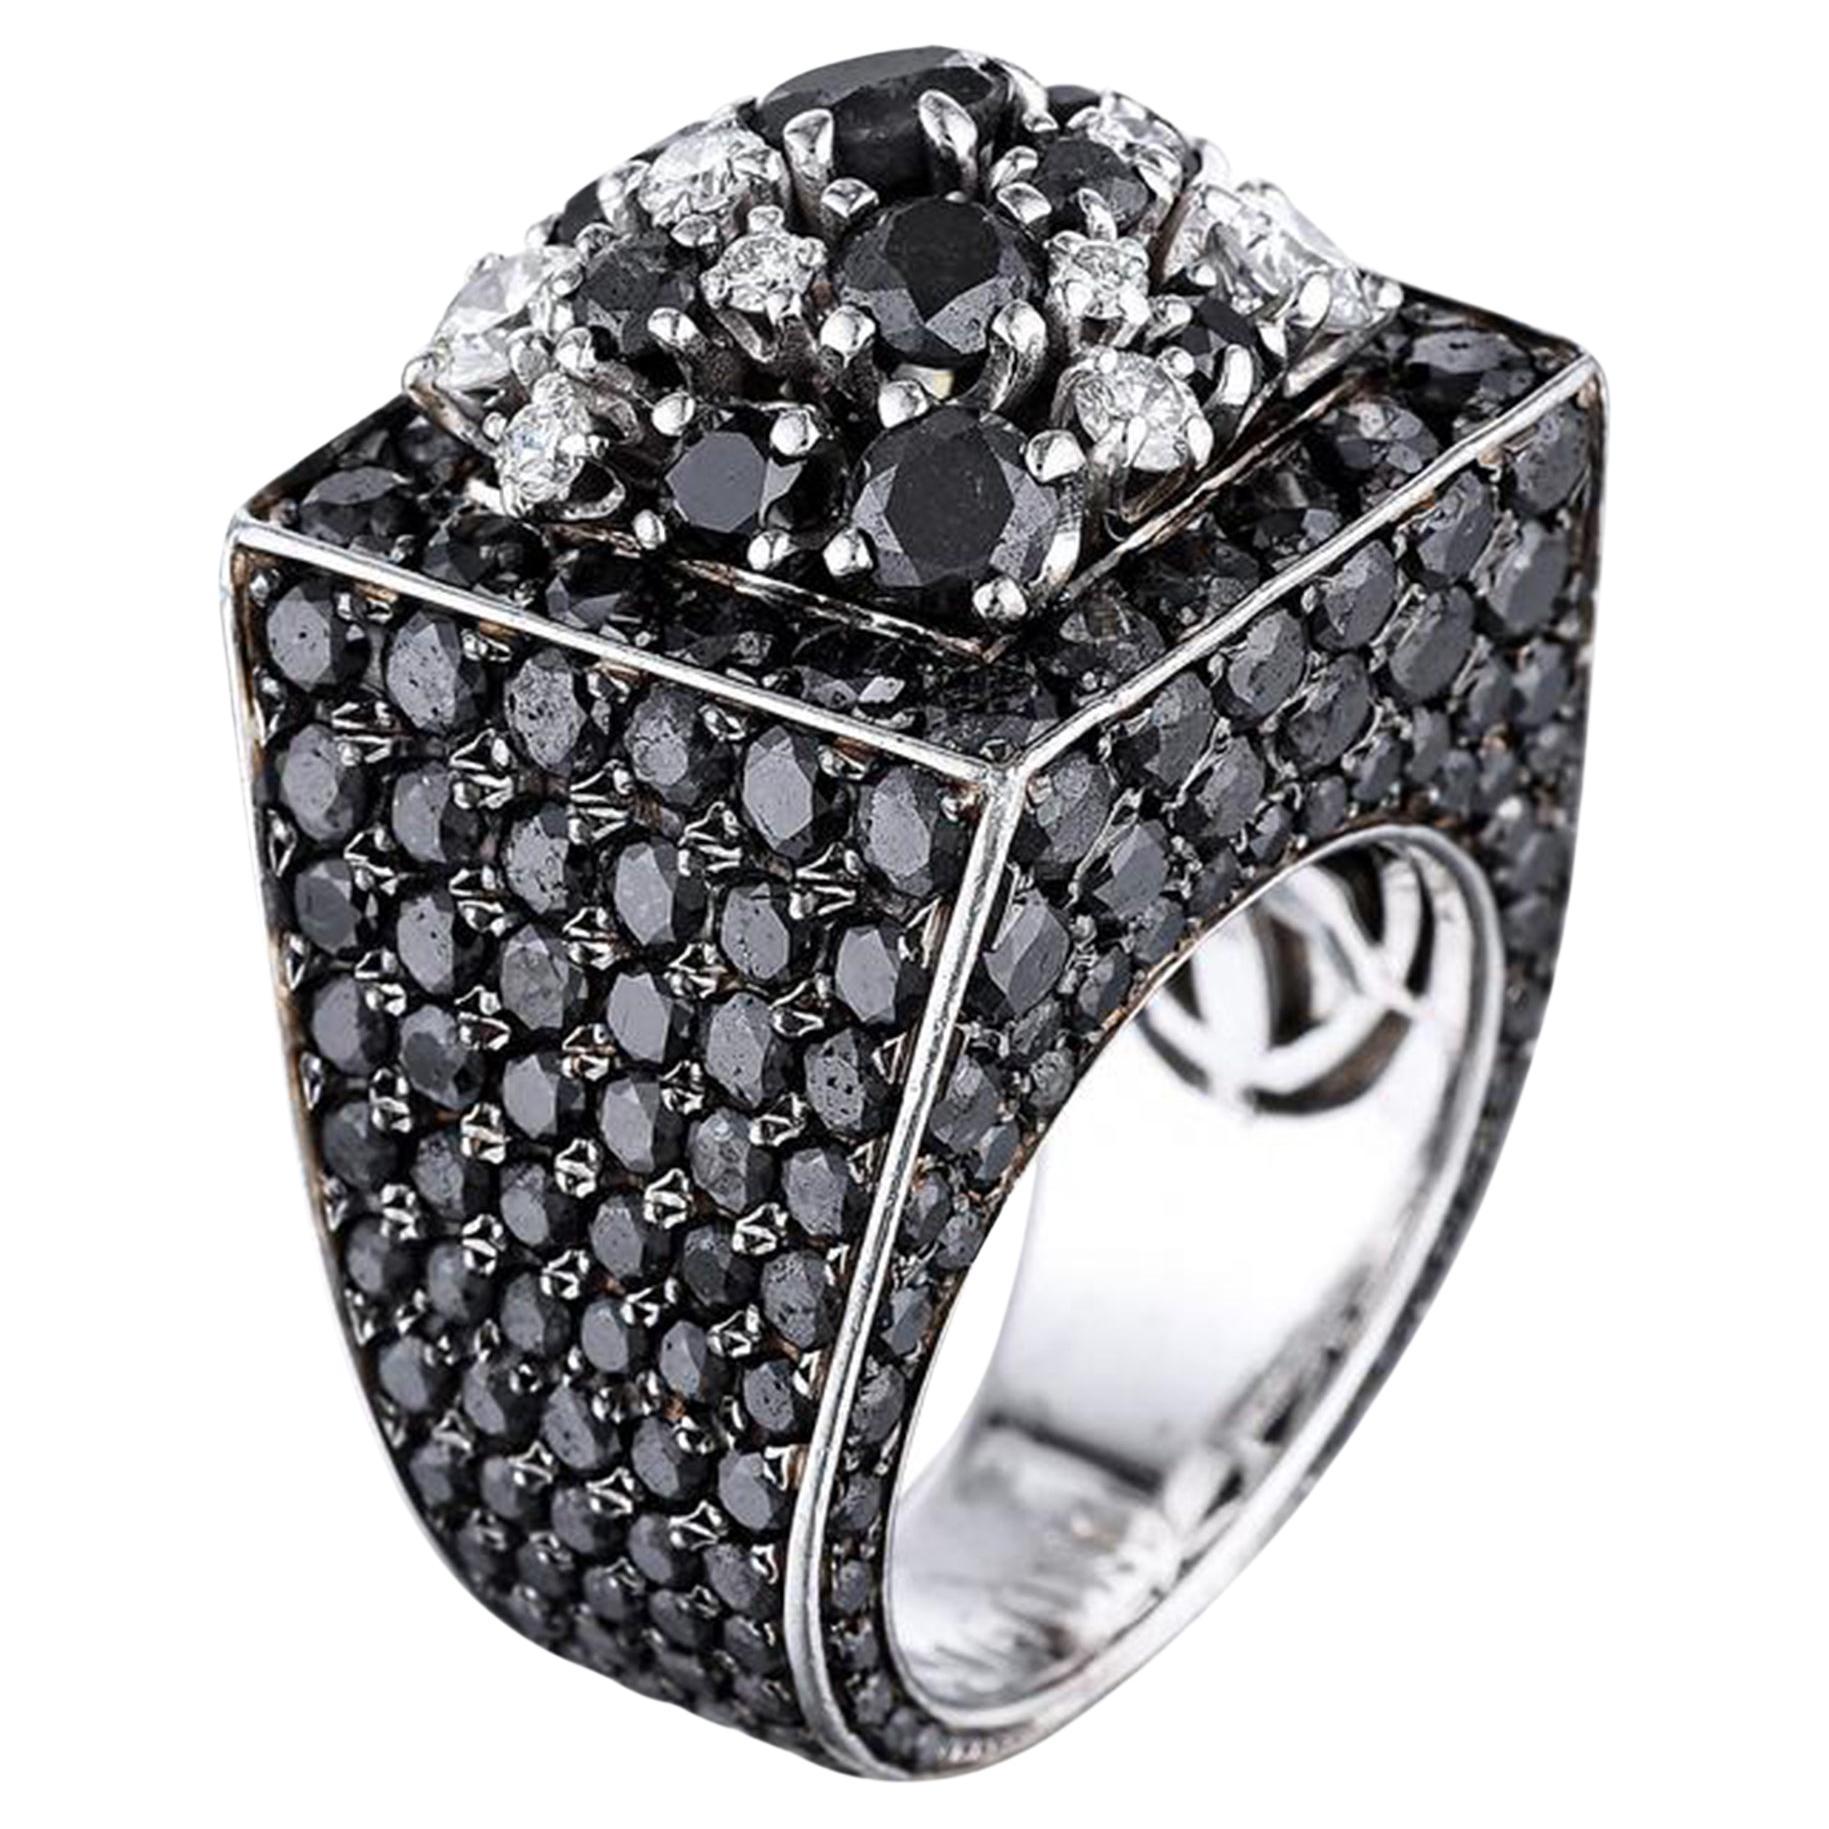 One of A Kind de GRISOGONO Diamond and Black Pearl Ring For Sale at 1stDibs